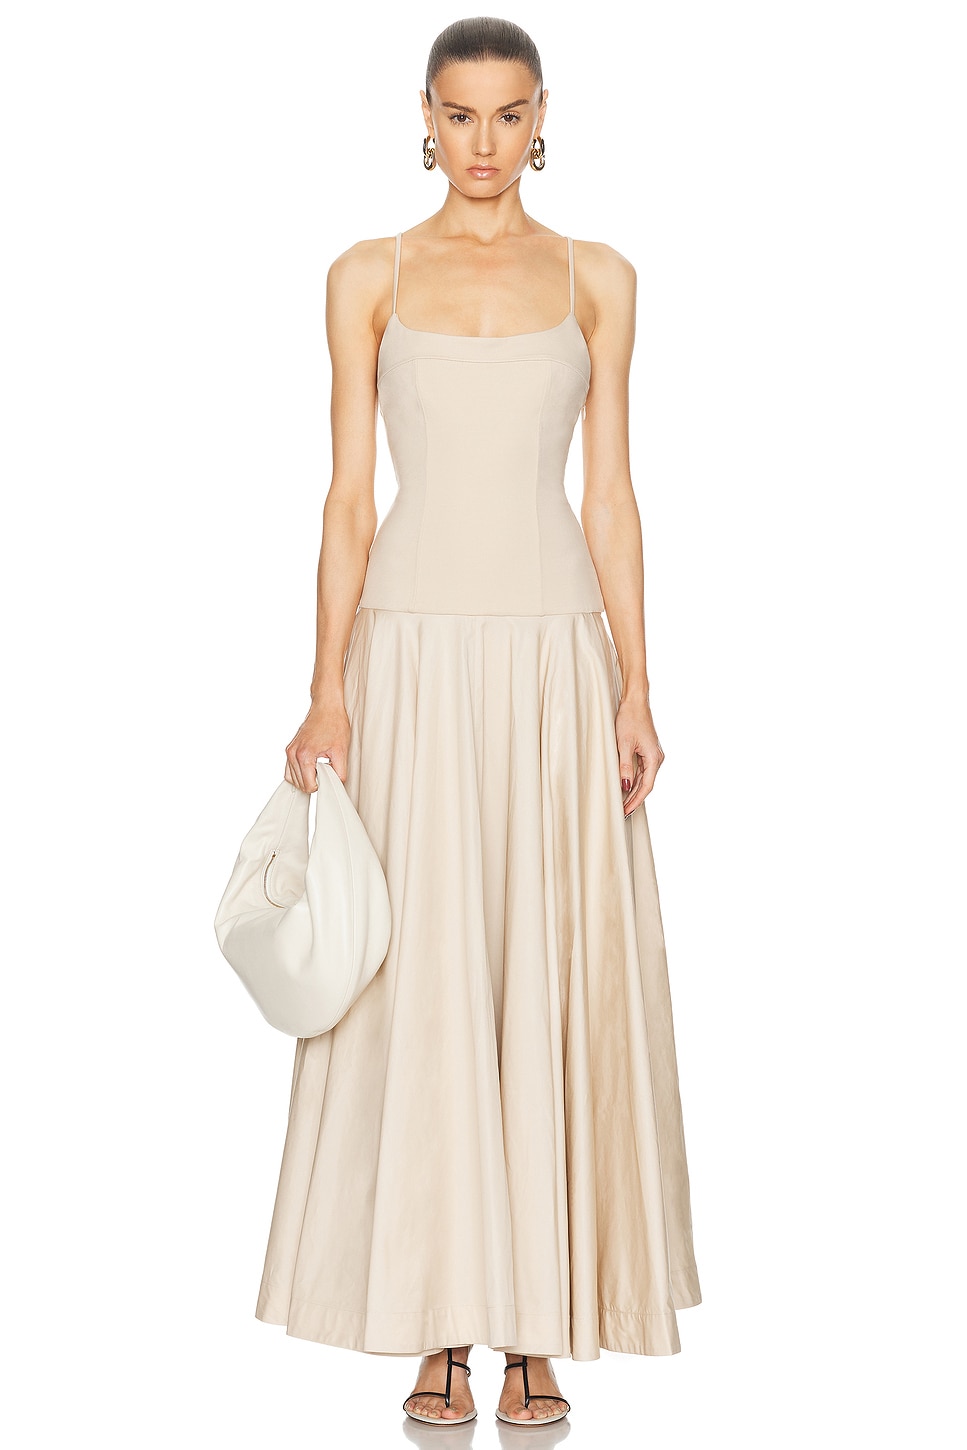 Image 1 of L'Academie by Marianna Laure Maxi Dress in Light Beige